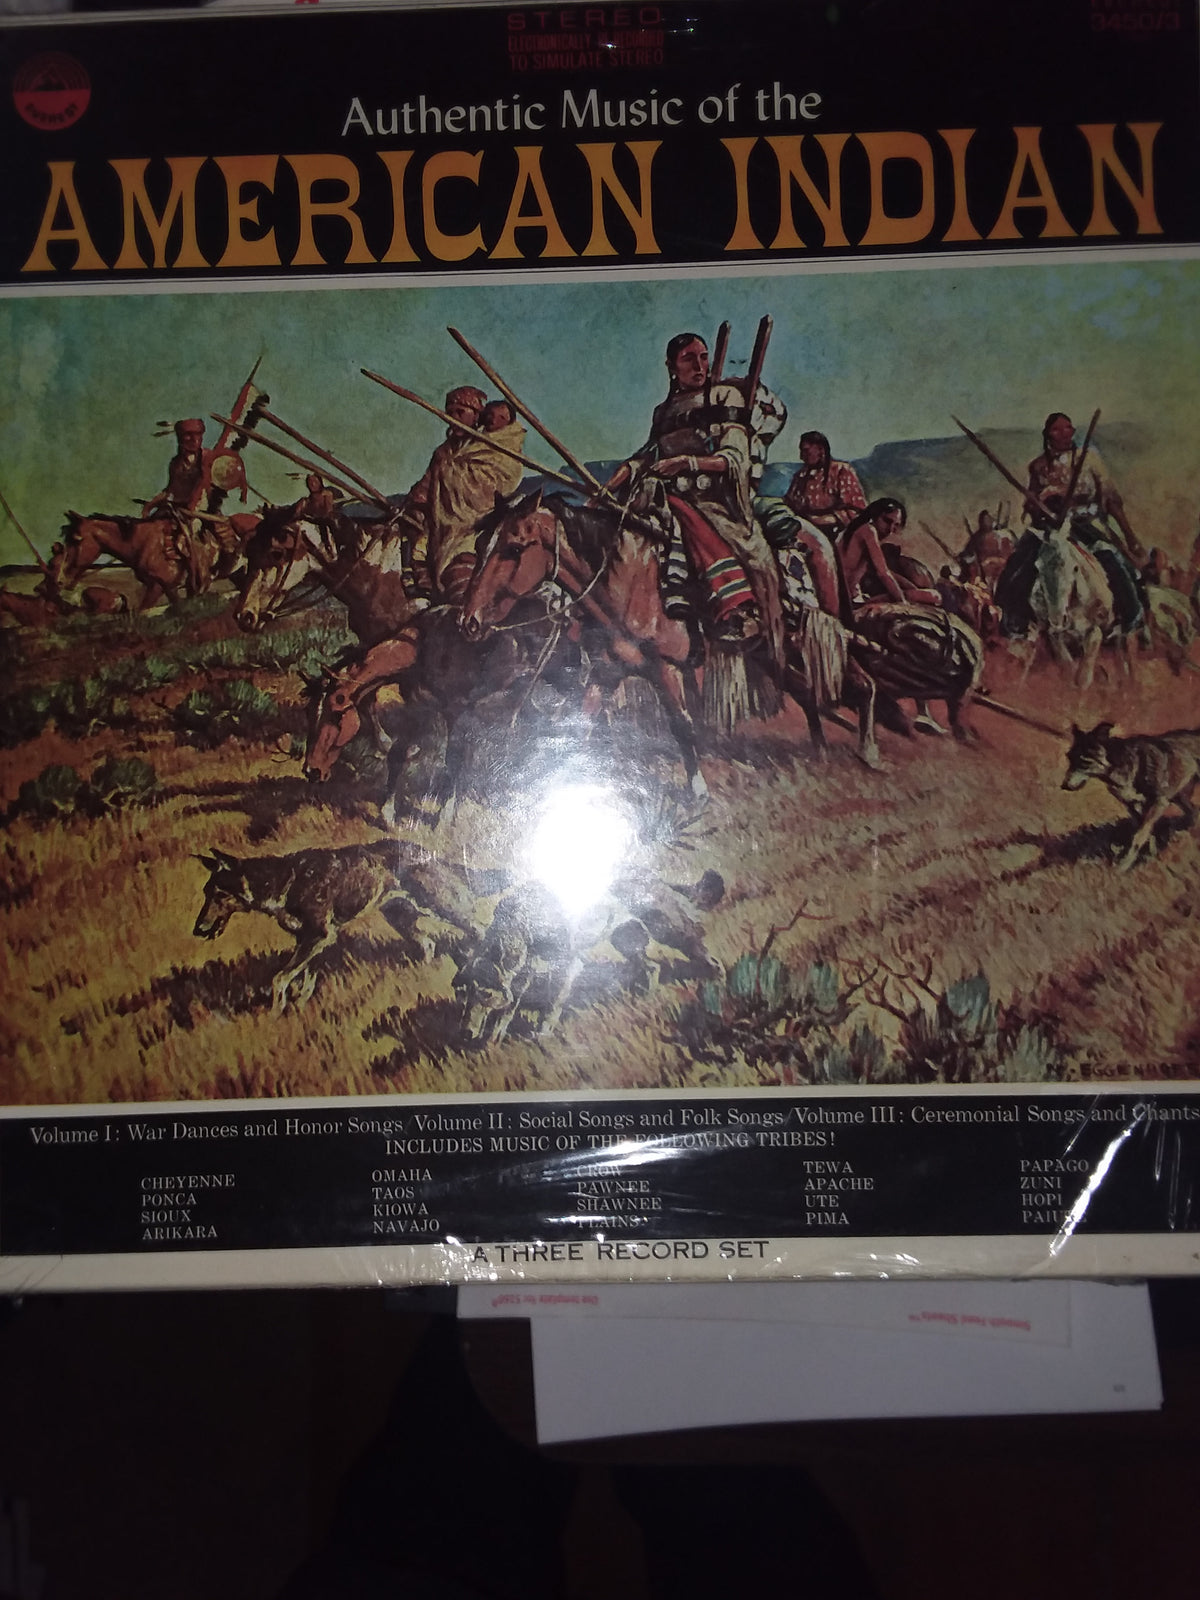 Authentic Music of the American Indian